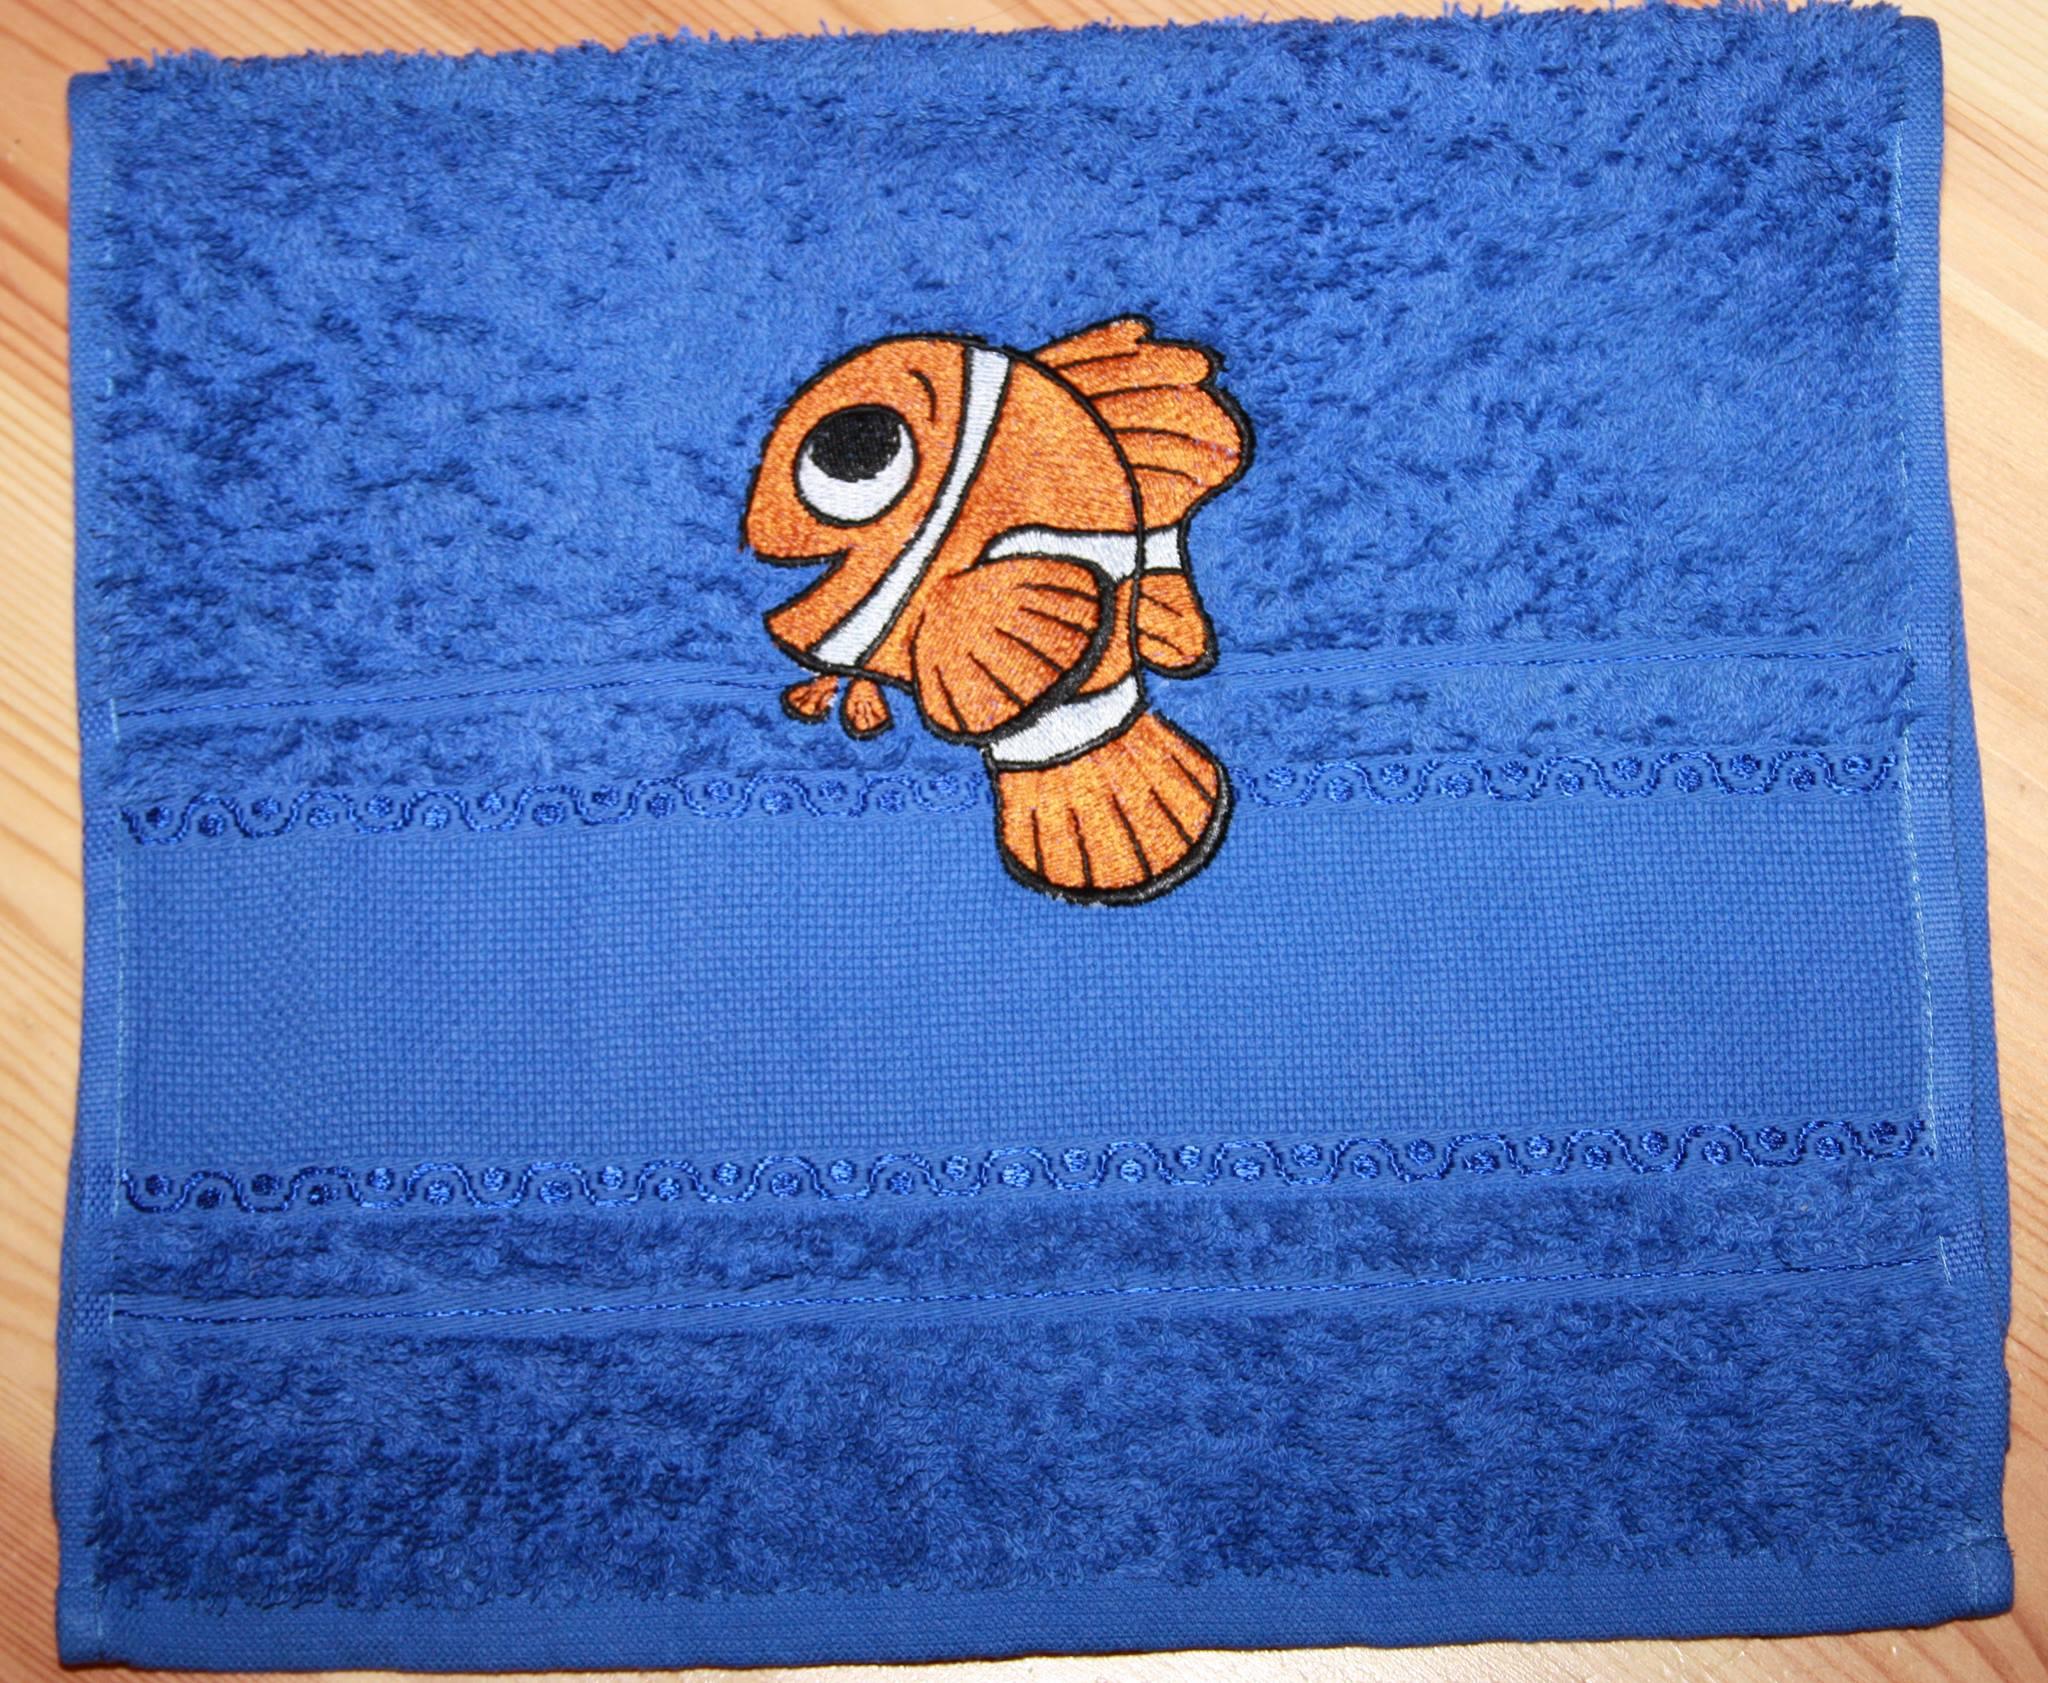 Towel with Marlin like Life embroidery design